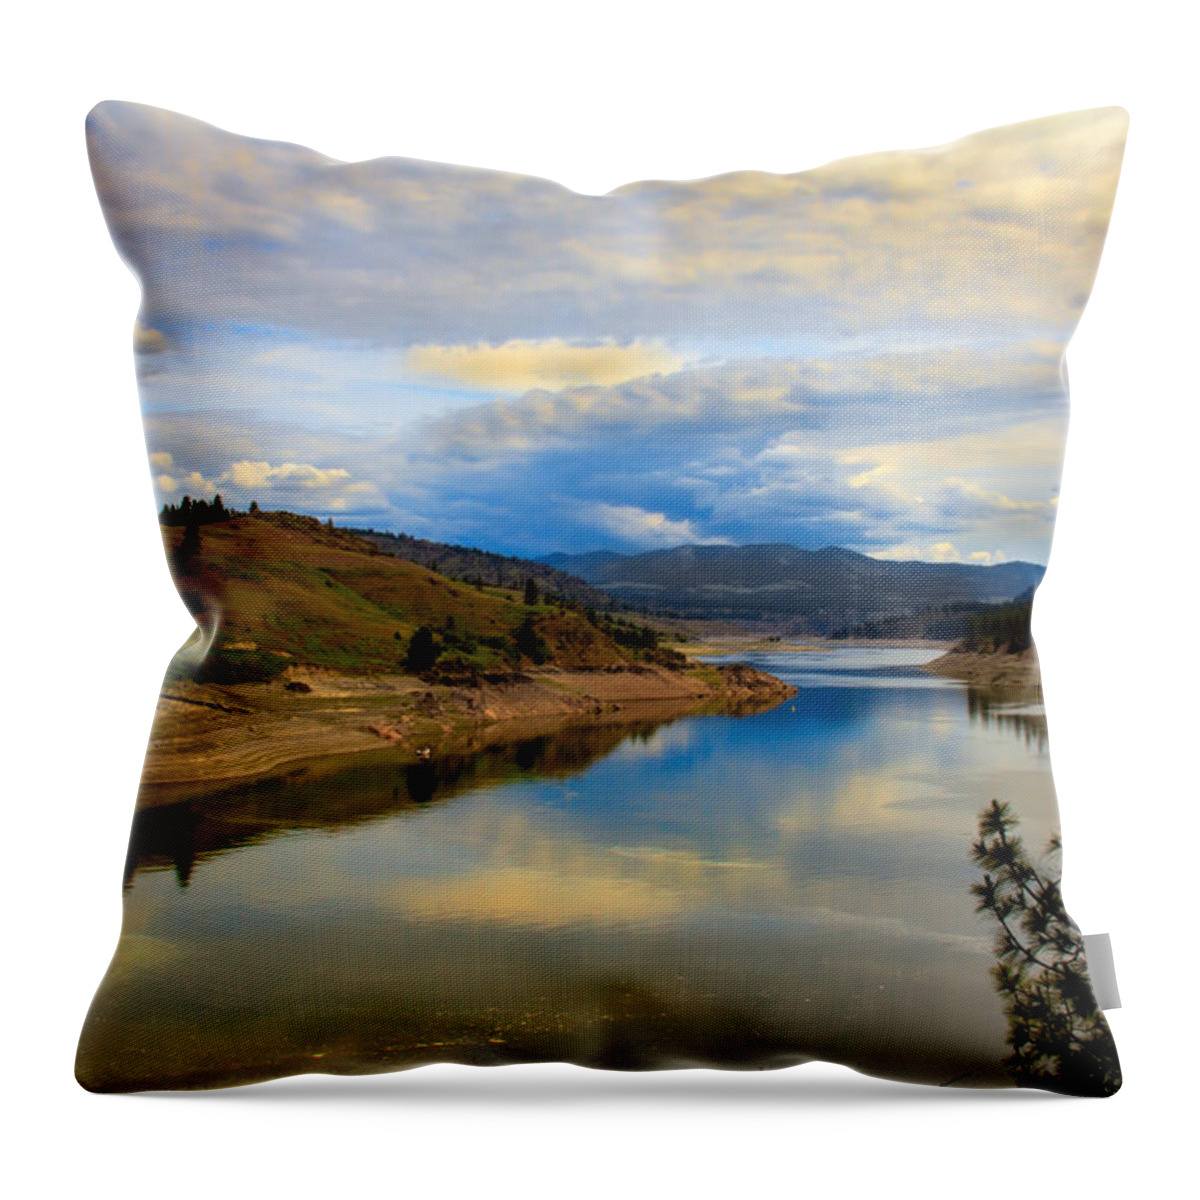 River Throw Pillow featuring the photograph Spokane River by Robert Bales